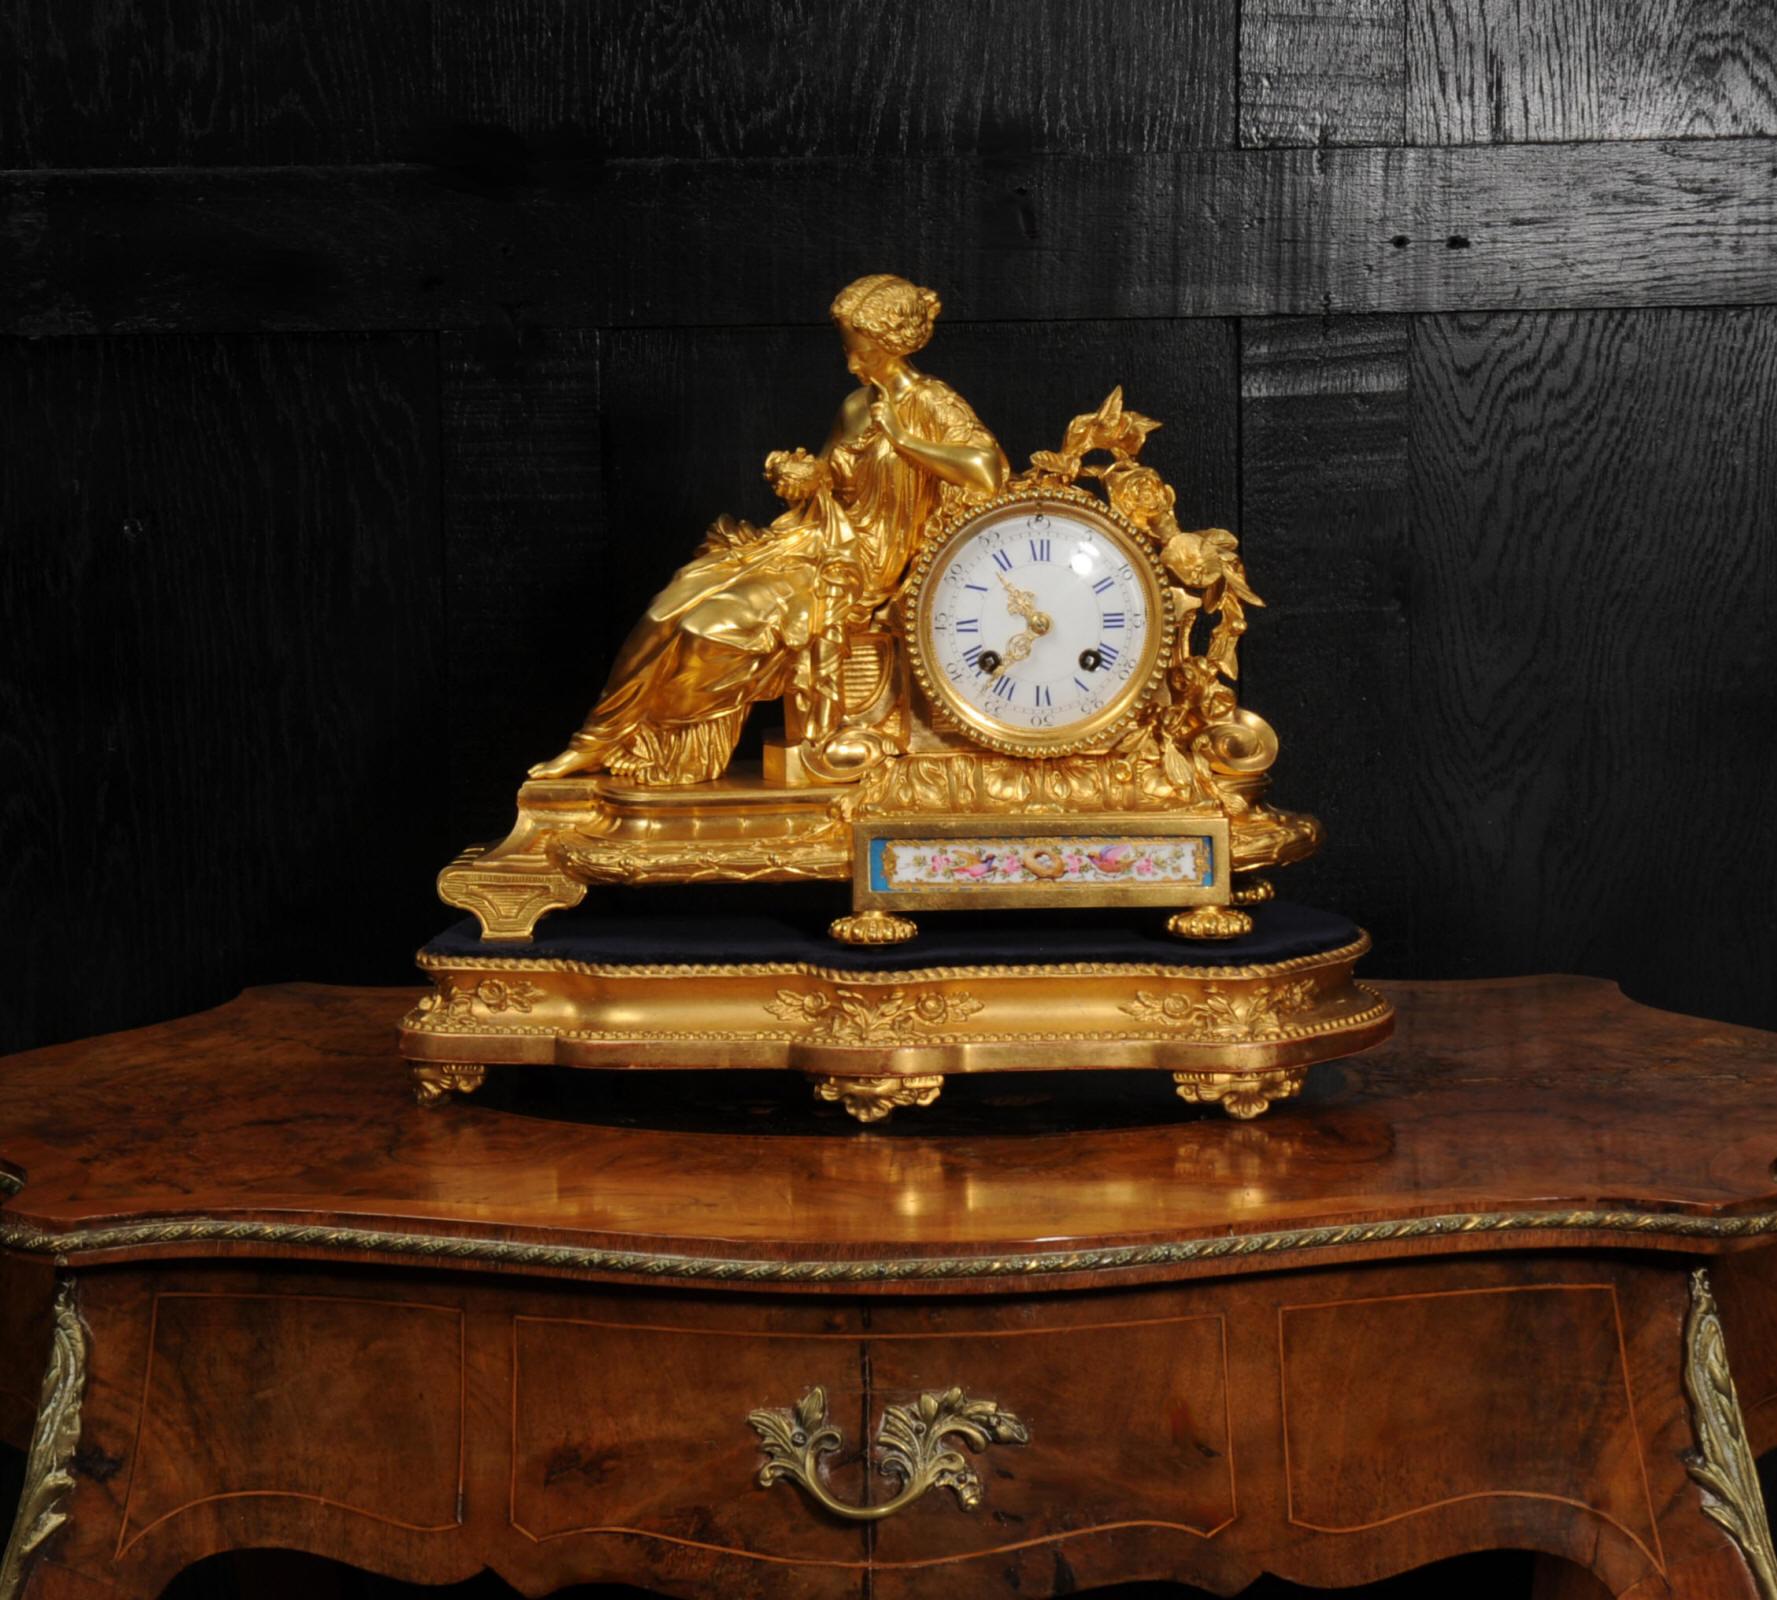 A fine and early Ormolu and Sèvres style porcelain clock by the famous case maker and retailer Rollin of Paris and the movement by Japy Frères. It is exquisitely modelled in finely gilded bronze, showcasing the finest quality. The intricate folds